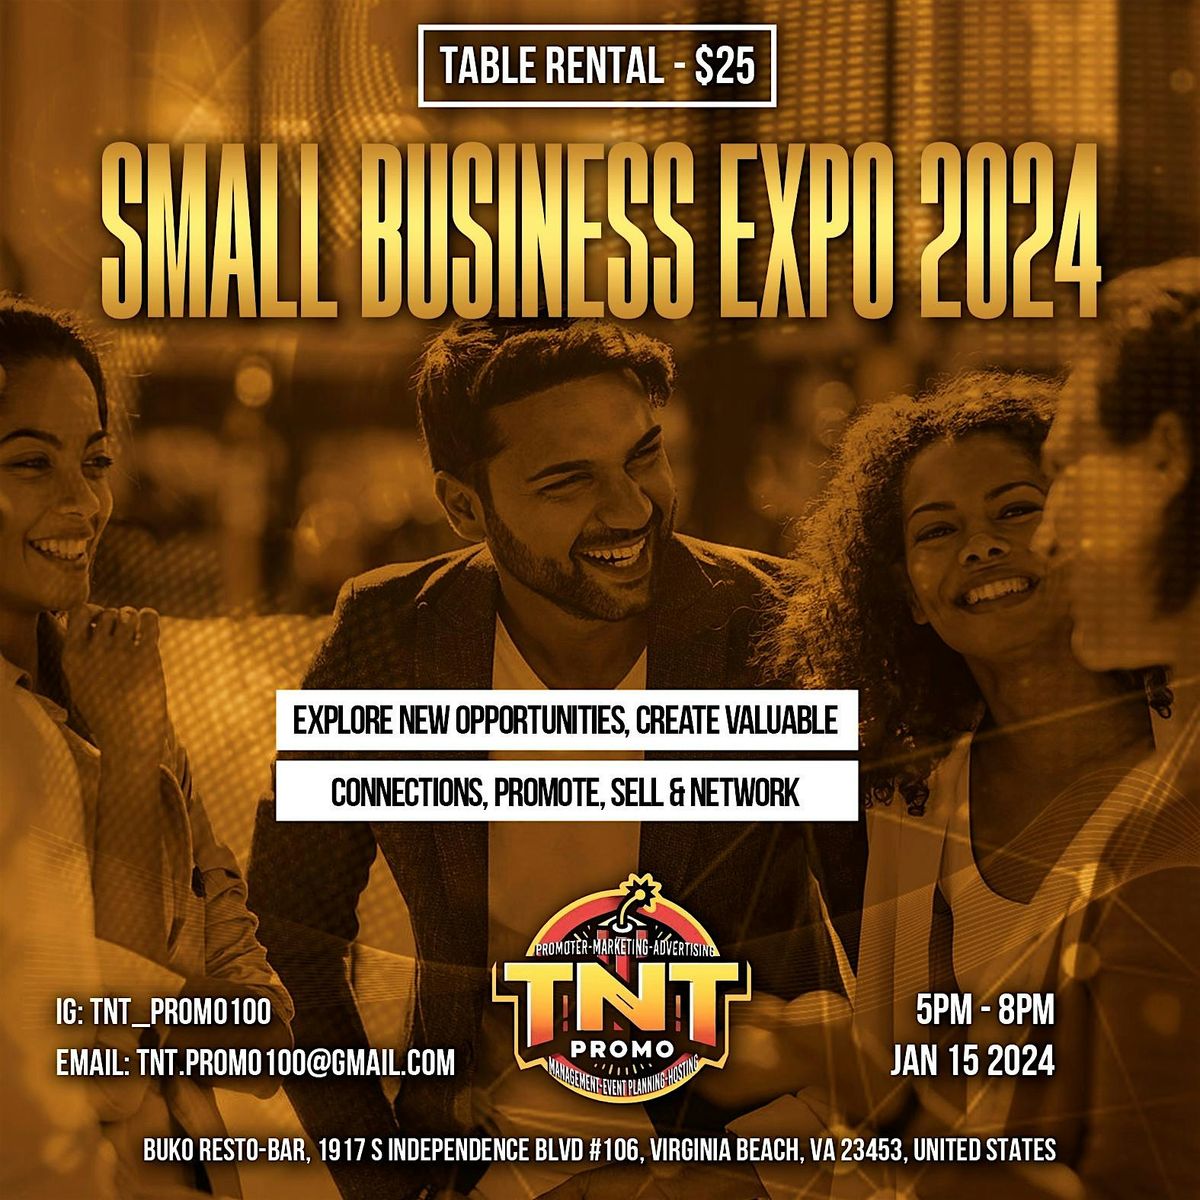 SMALL BUSINESS EXPO 2024